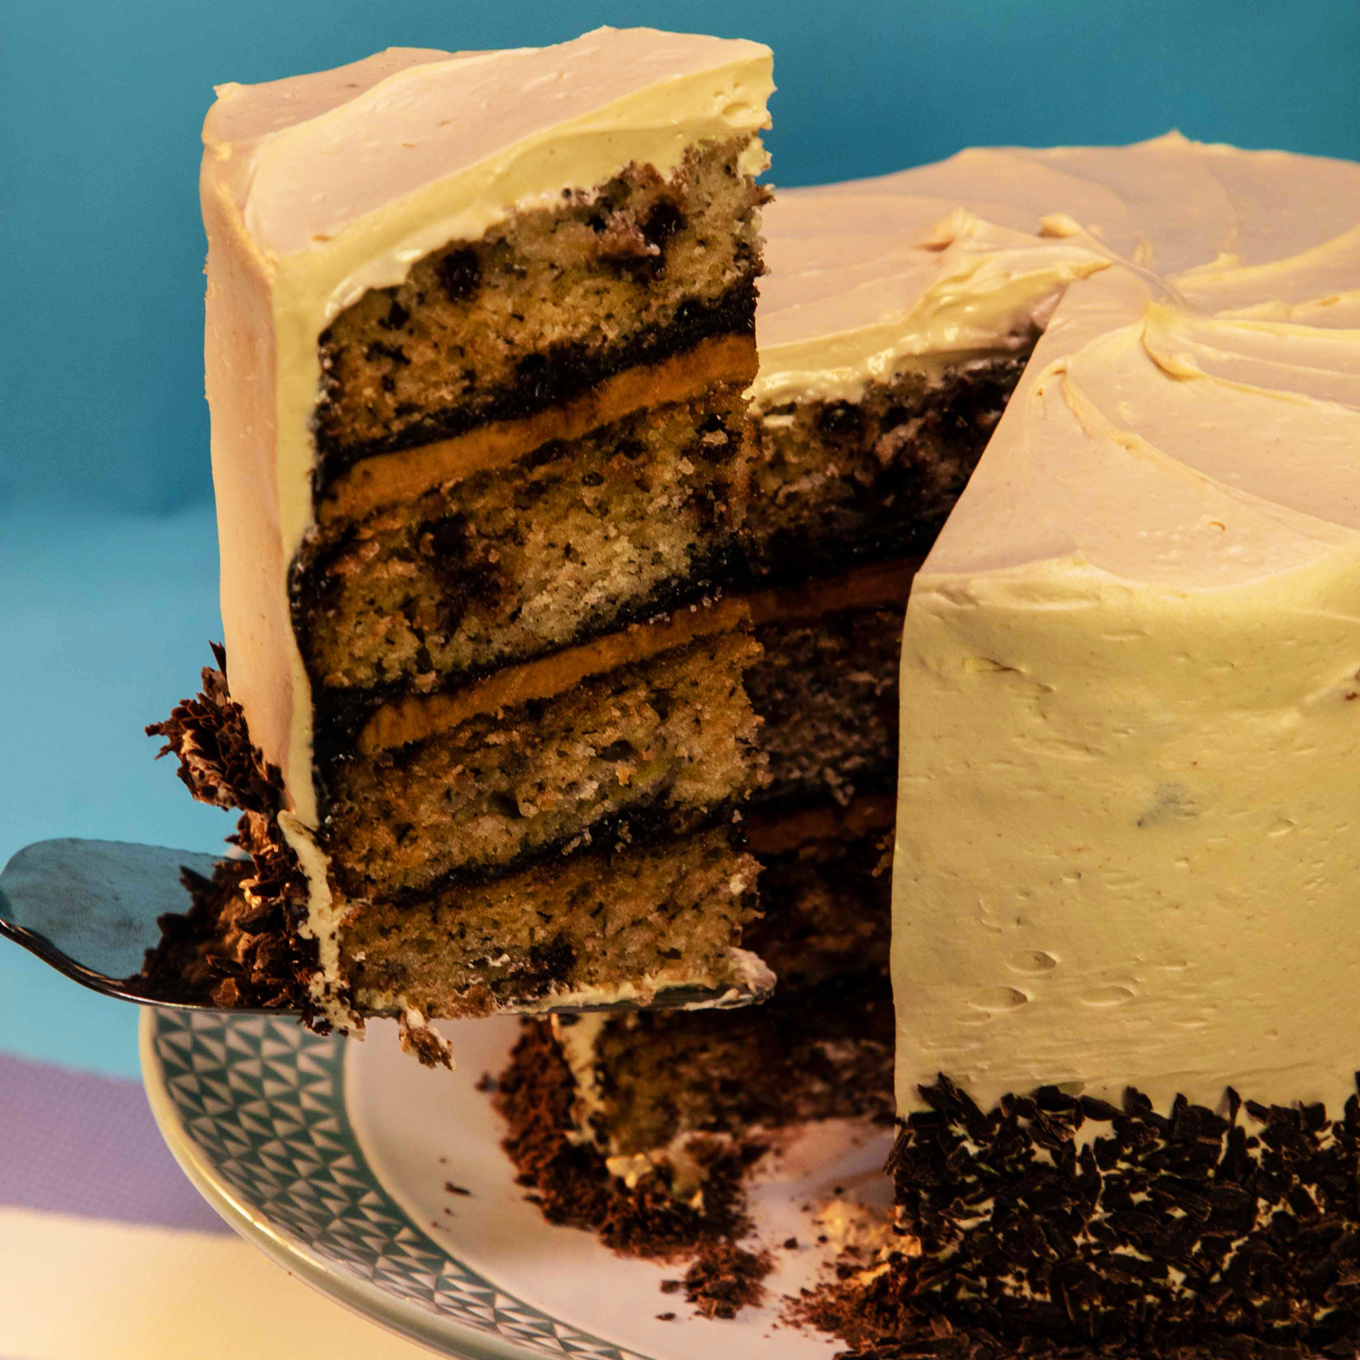 Banana Chocolate Chip Cake With Peanut Butter Frosting | New Gen Baker